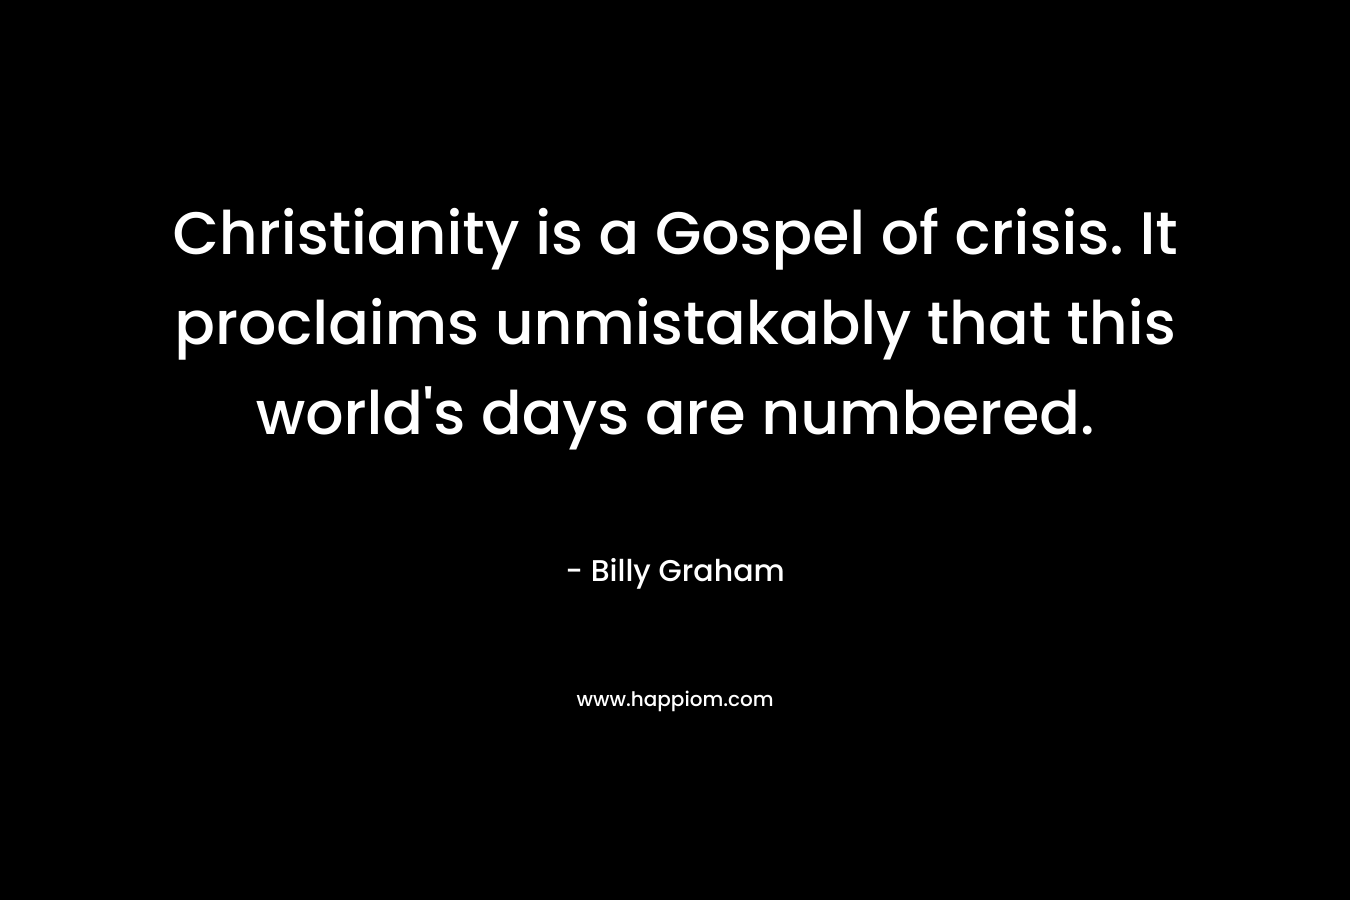 Christianity is a Gospel of crisis. It proclaims unmistakably that this world's days are numbered.